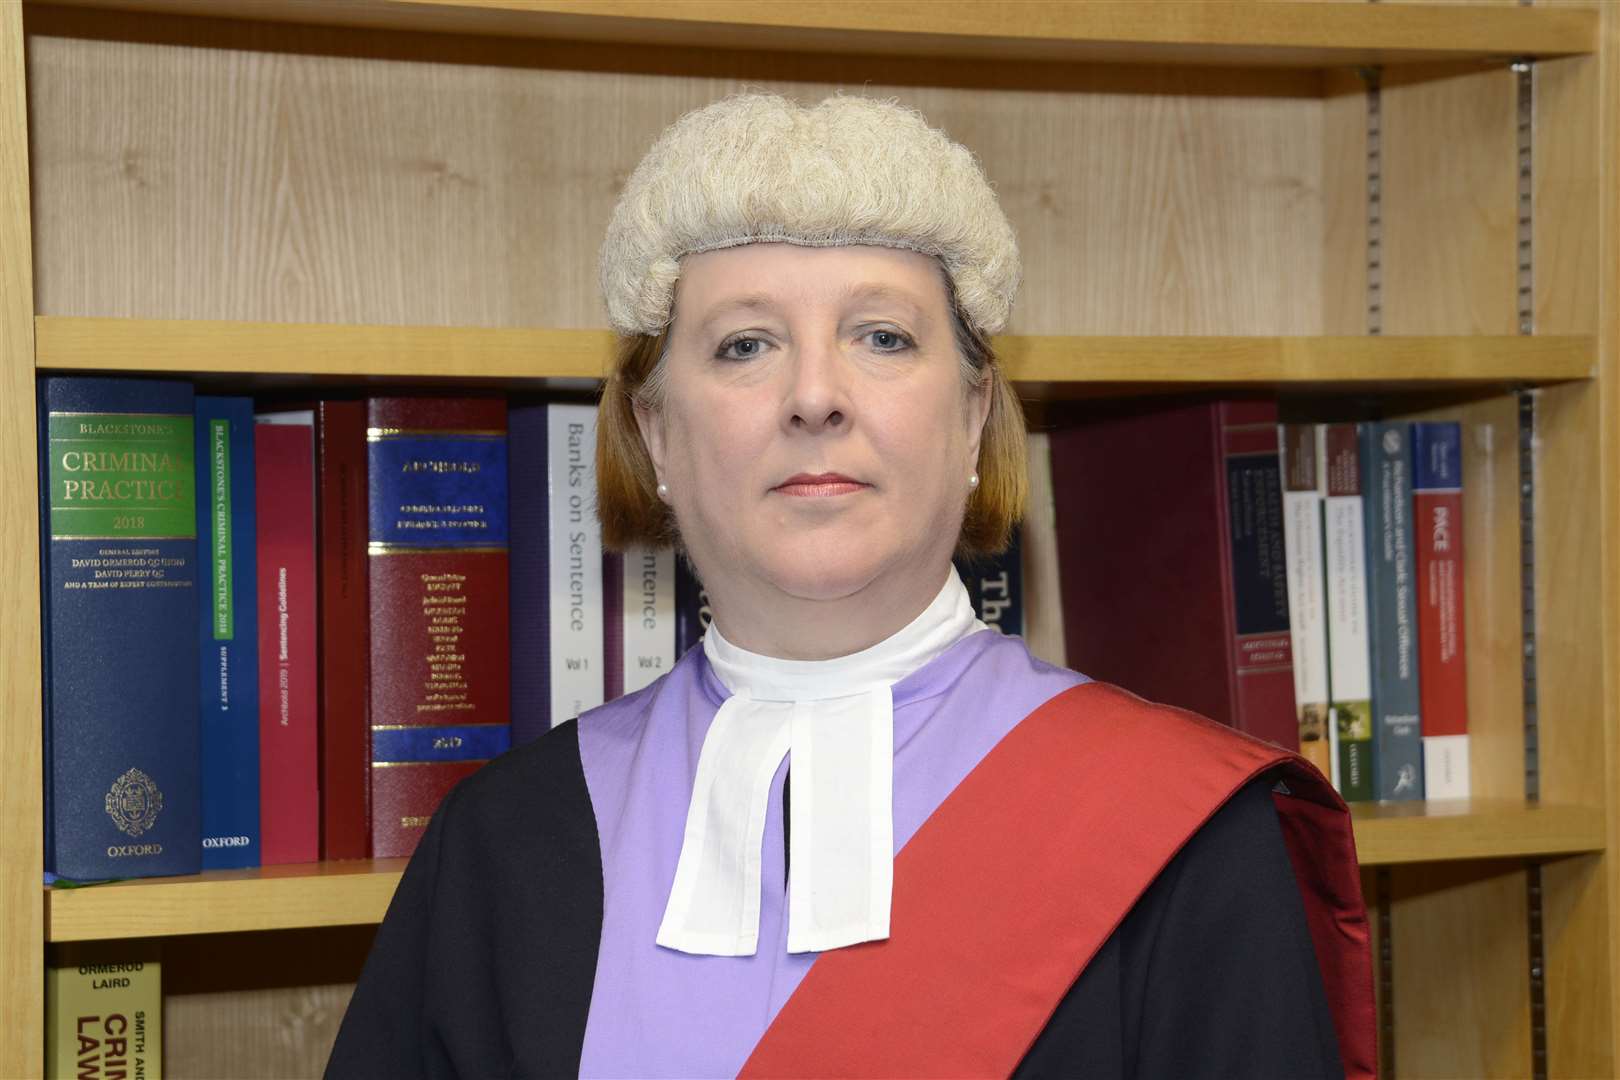 Judge Catherine Brown said Burrows was lucky not to have killed his victim